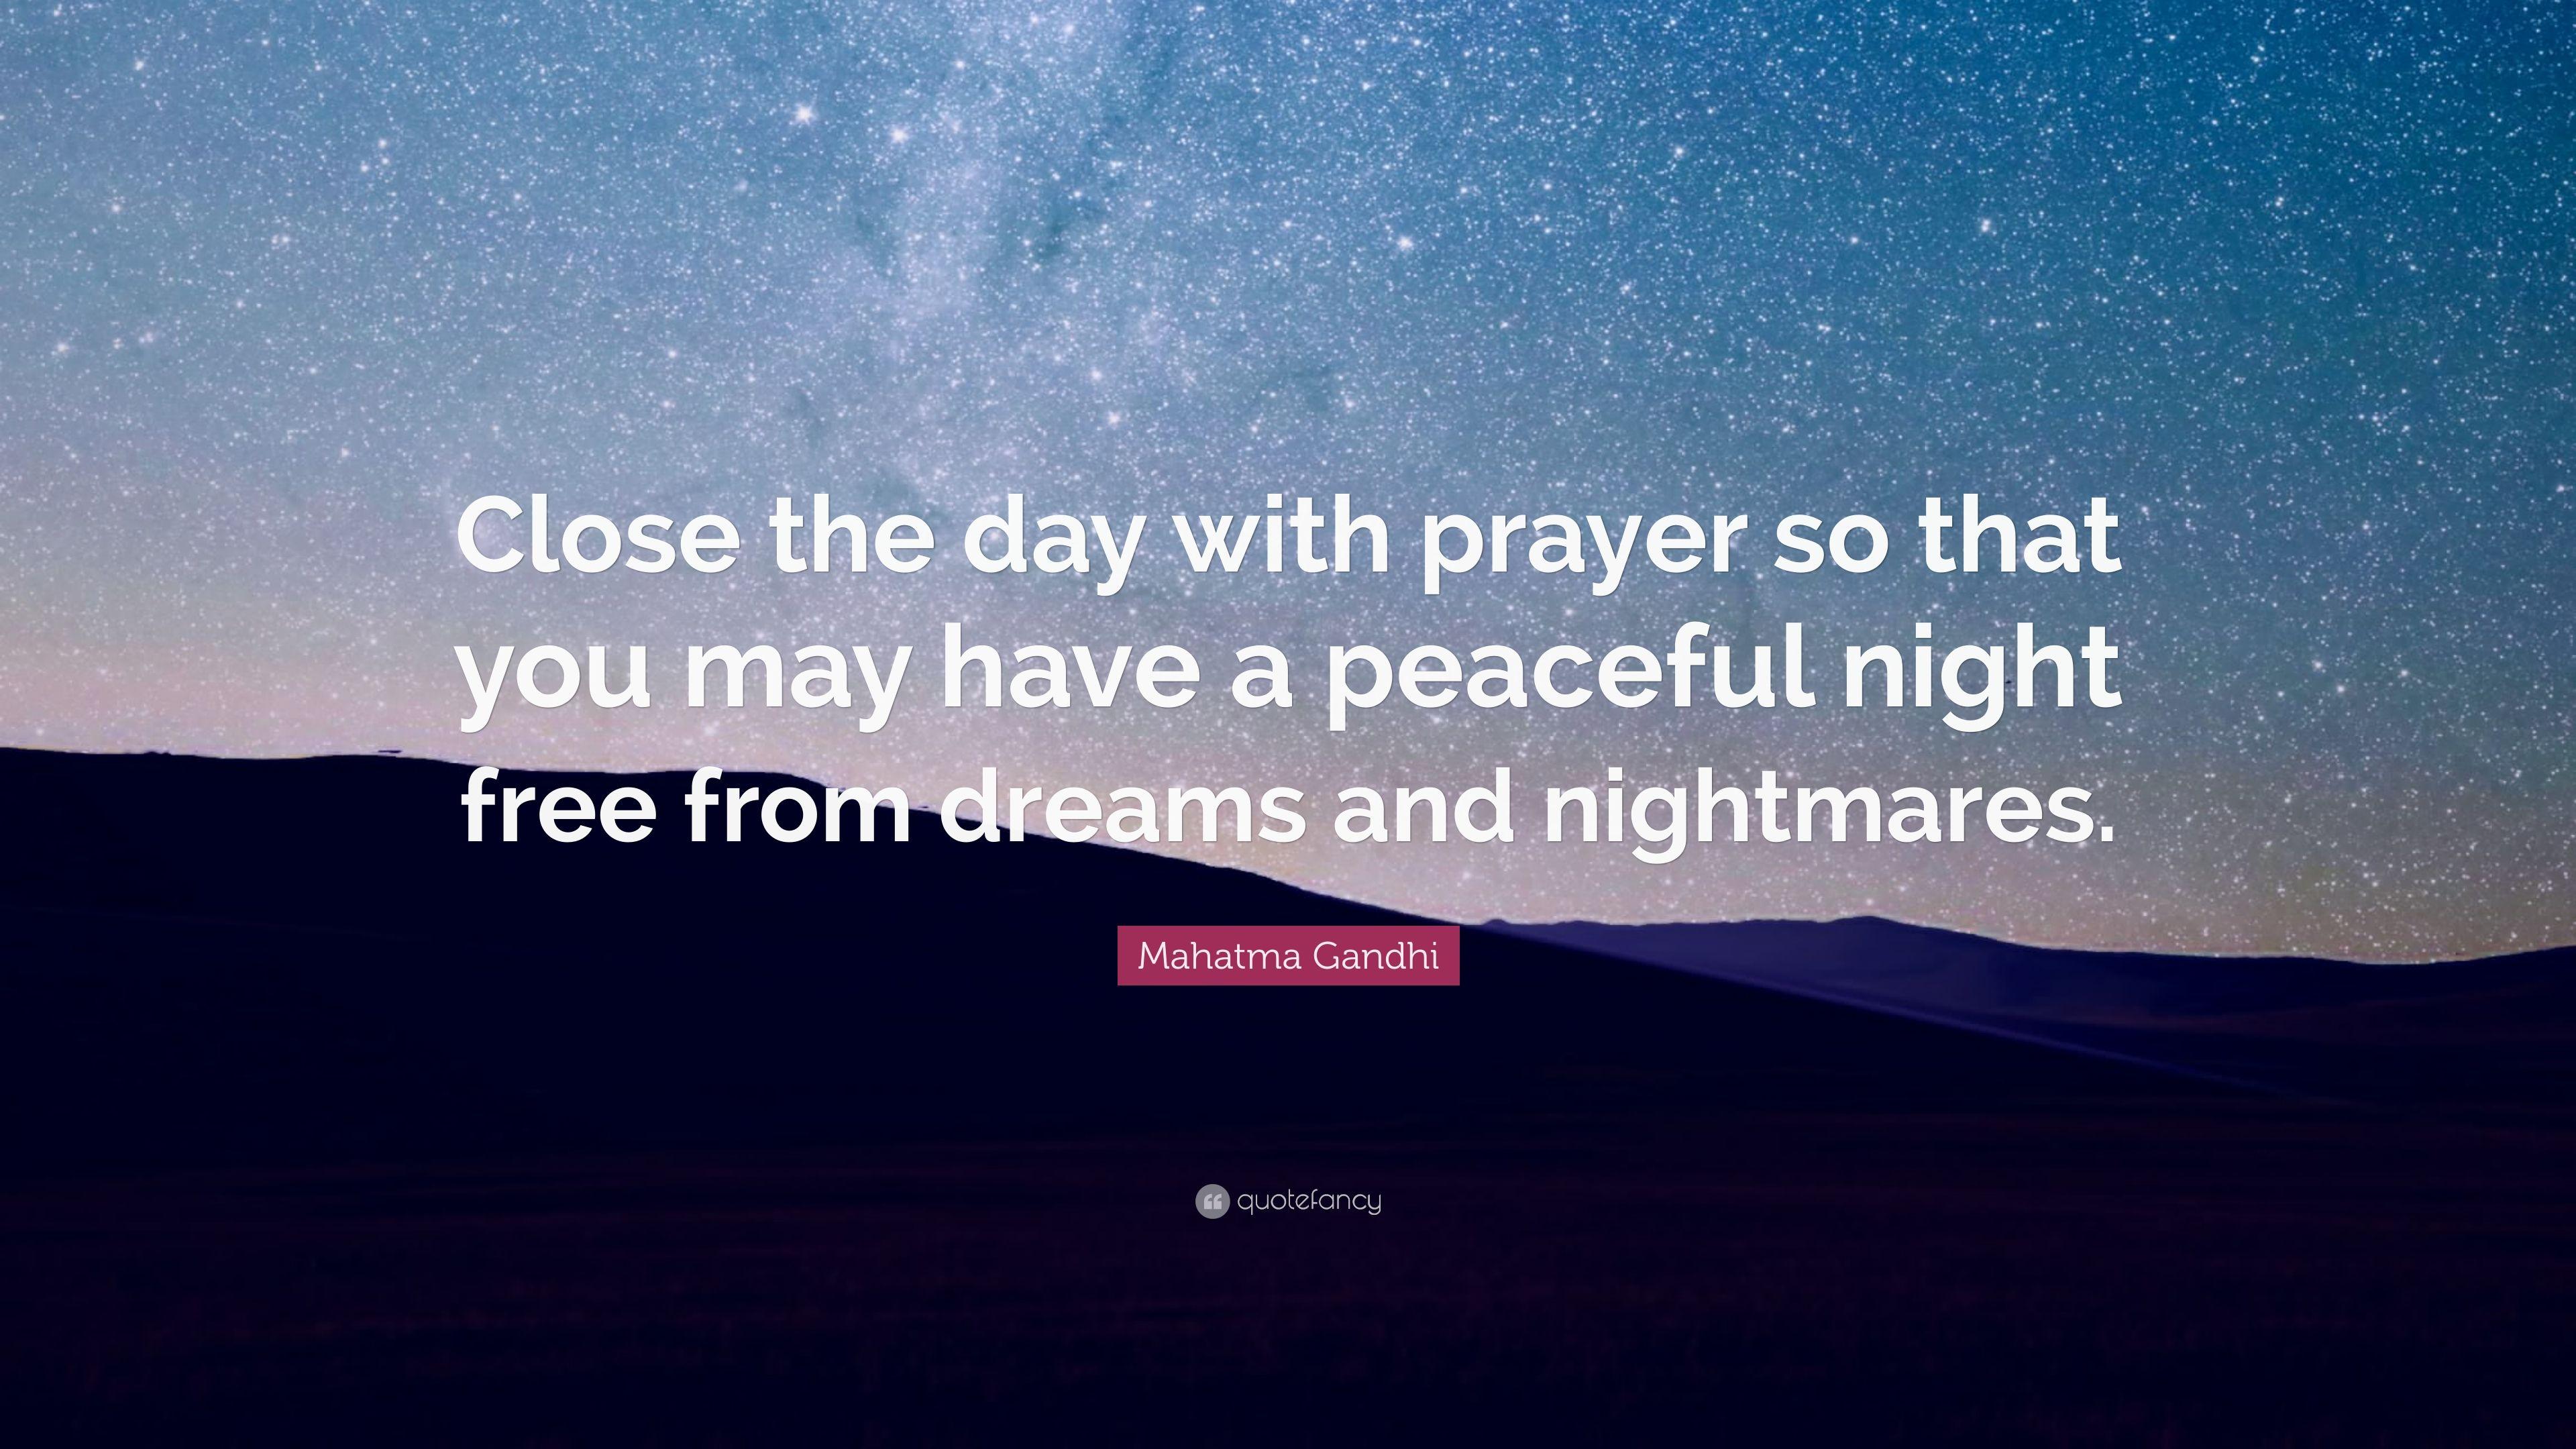 Mahatma Gandhi Quote: “Close the day with prayer so that you